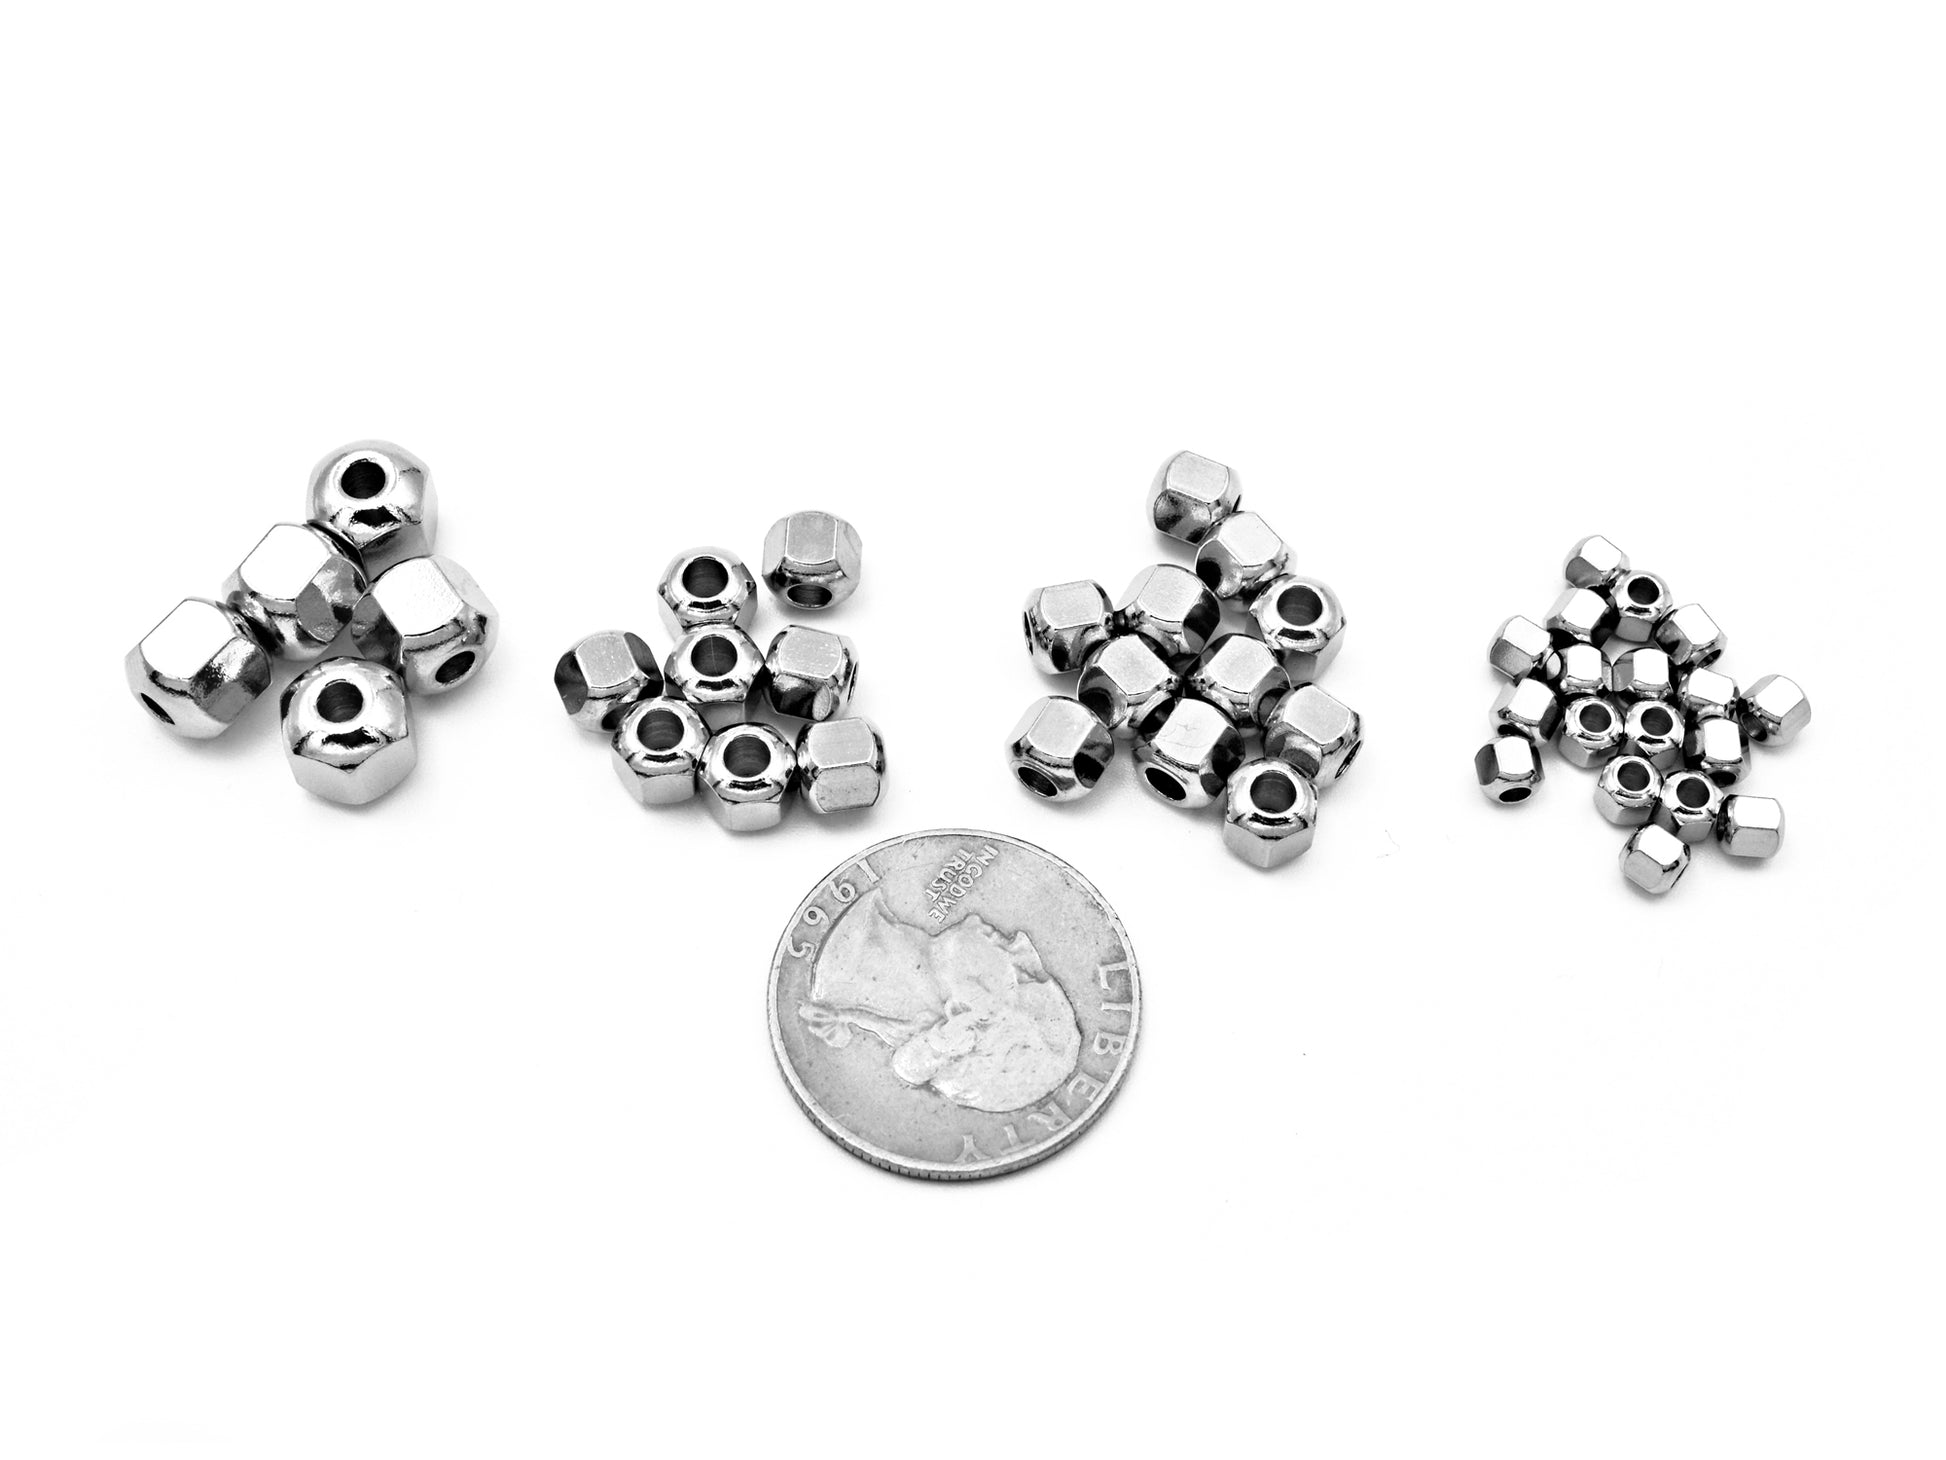 20 PCs Stainless Steel Silver Screw Roundel Plain Spacer Beads Size 4mm,6mm,8mm Jewelry Findings Supply For Jewelry Making and Wholesale